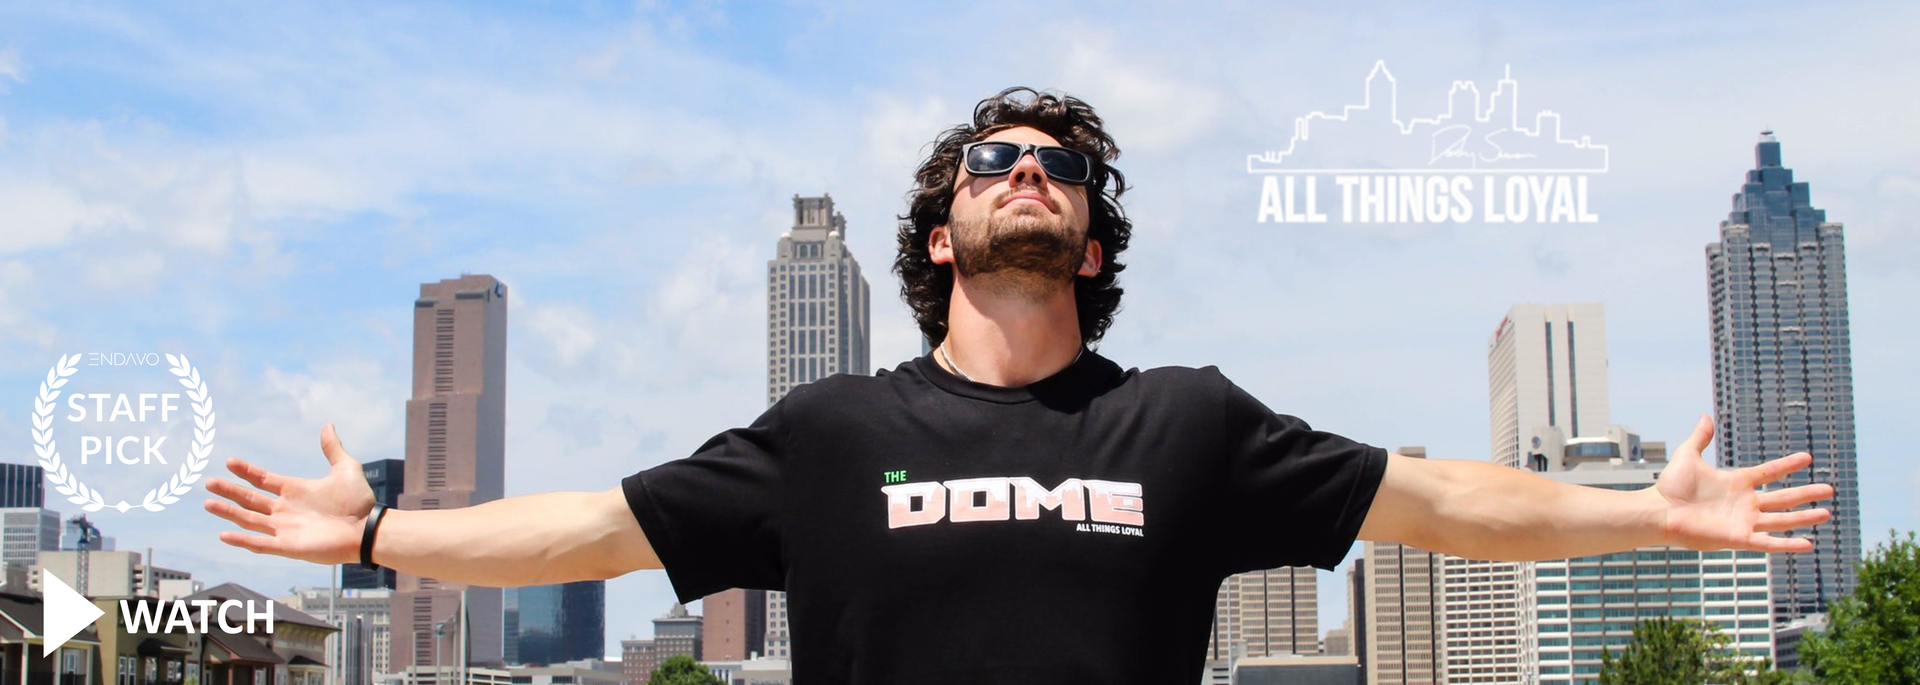 All Things Loyal - Dansby Swanson